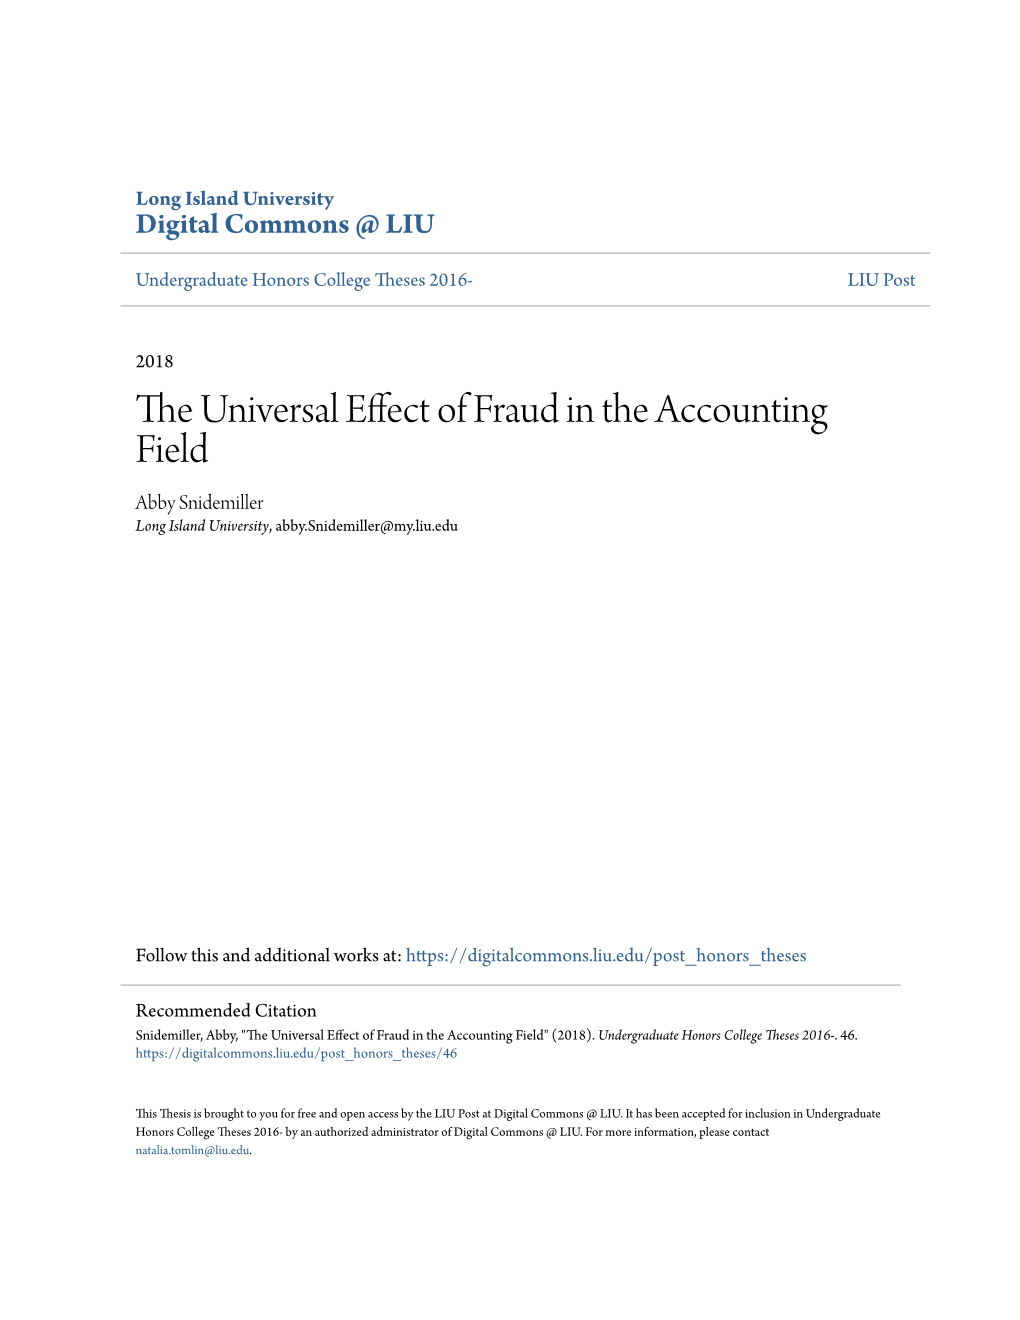 The Universal Effect of Fraud in the Accounting Field